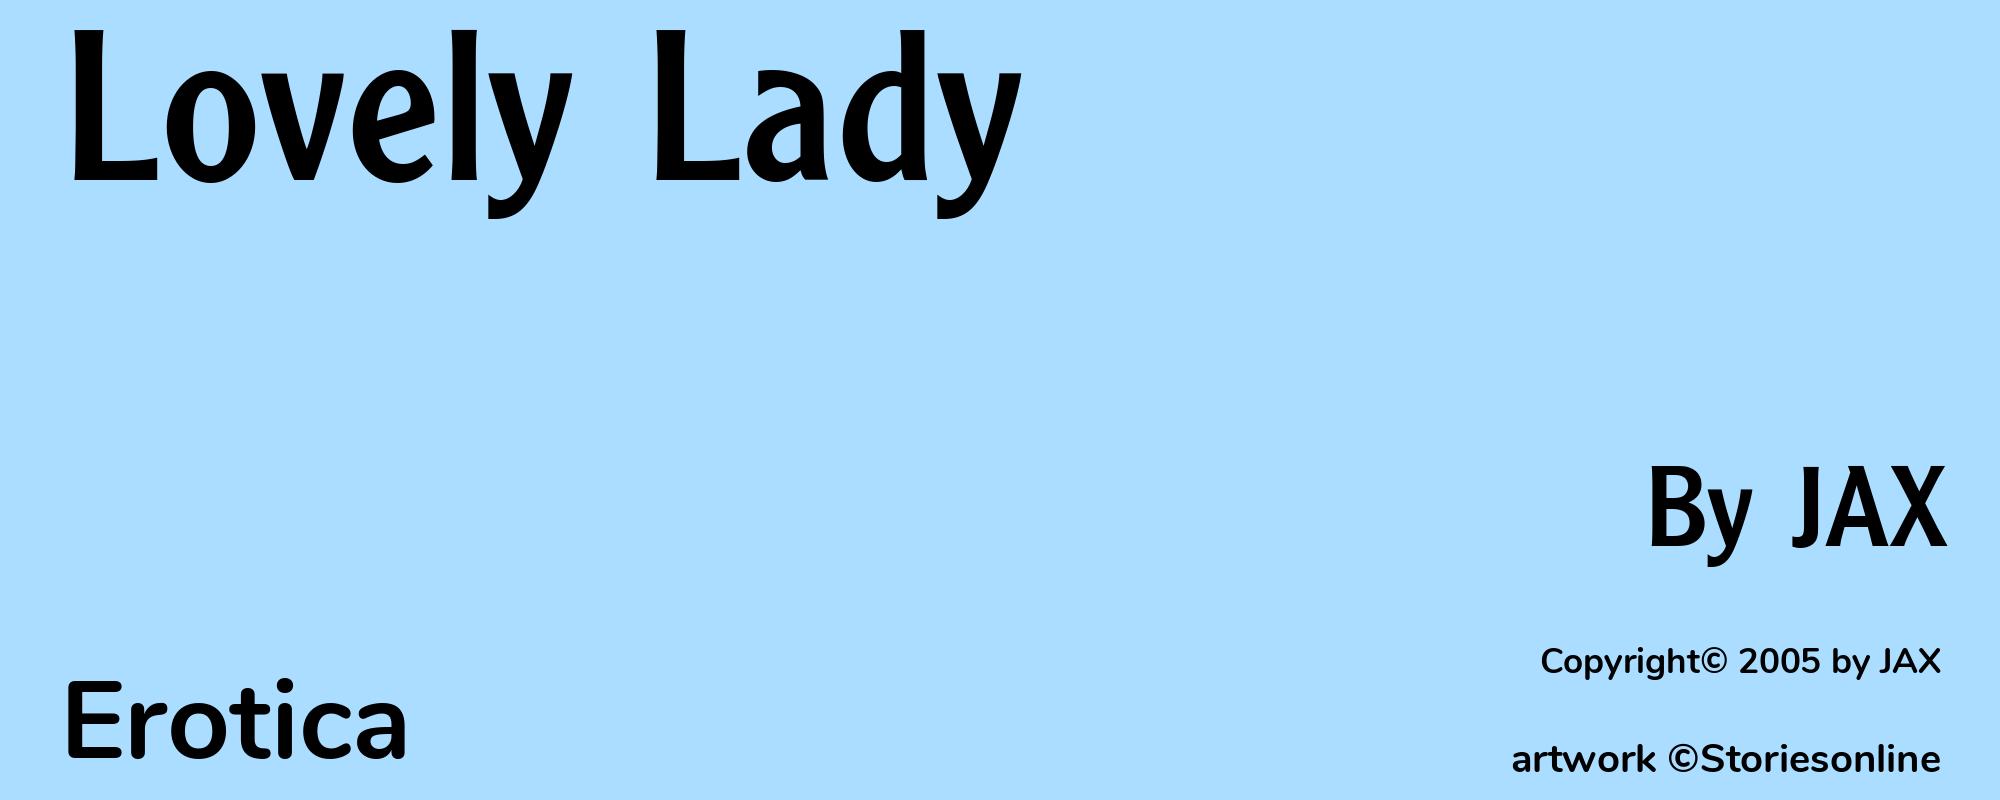 Lovely Lady - Cover